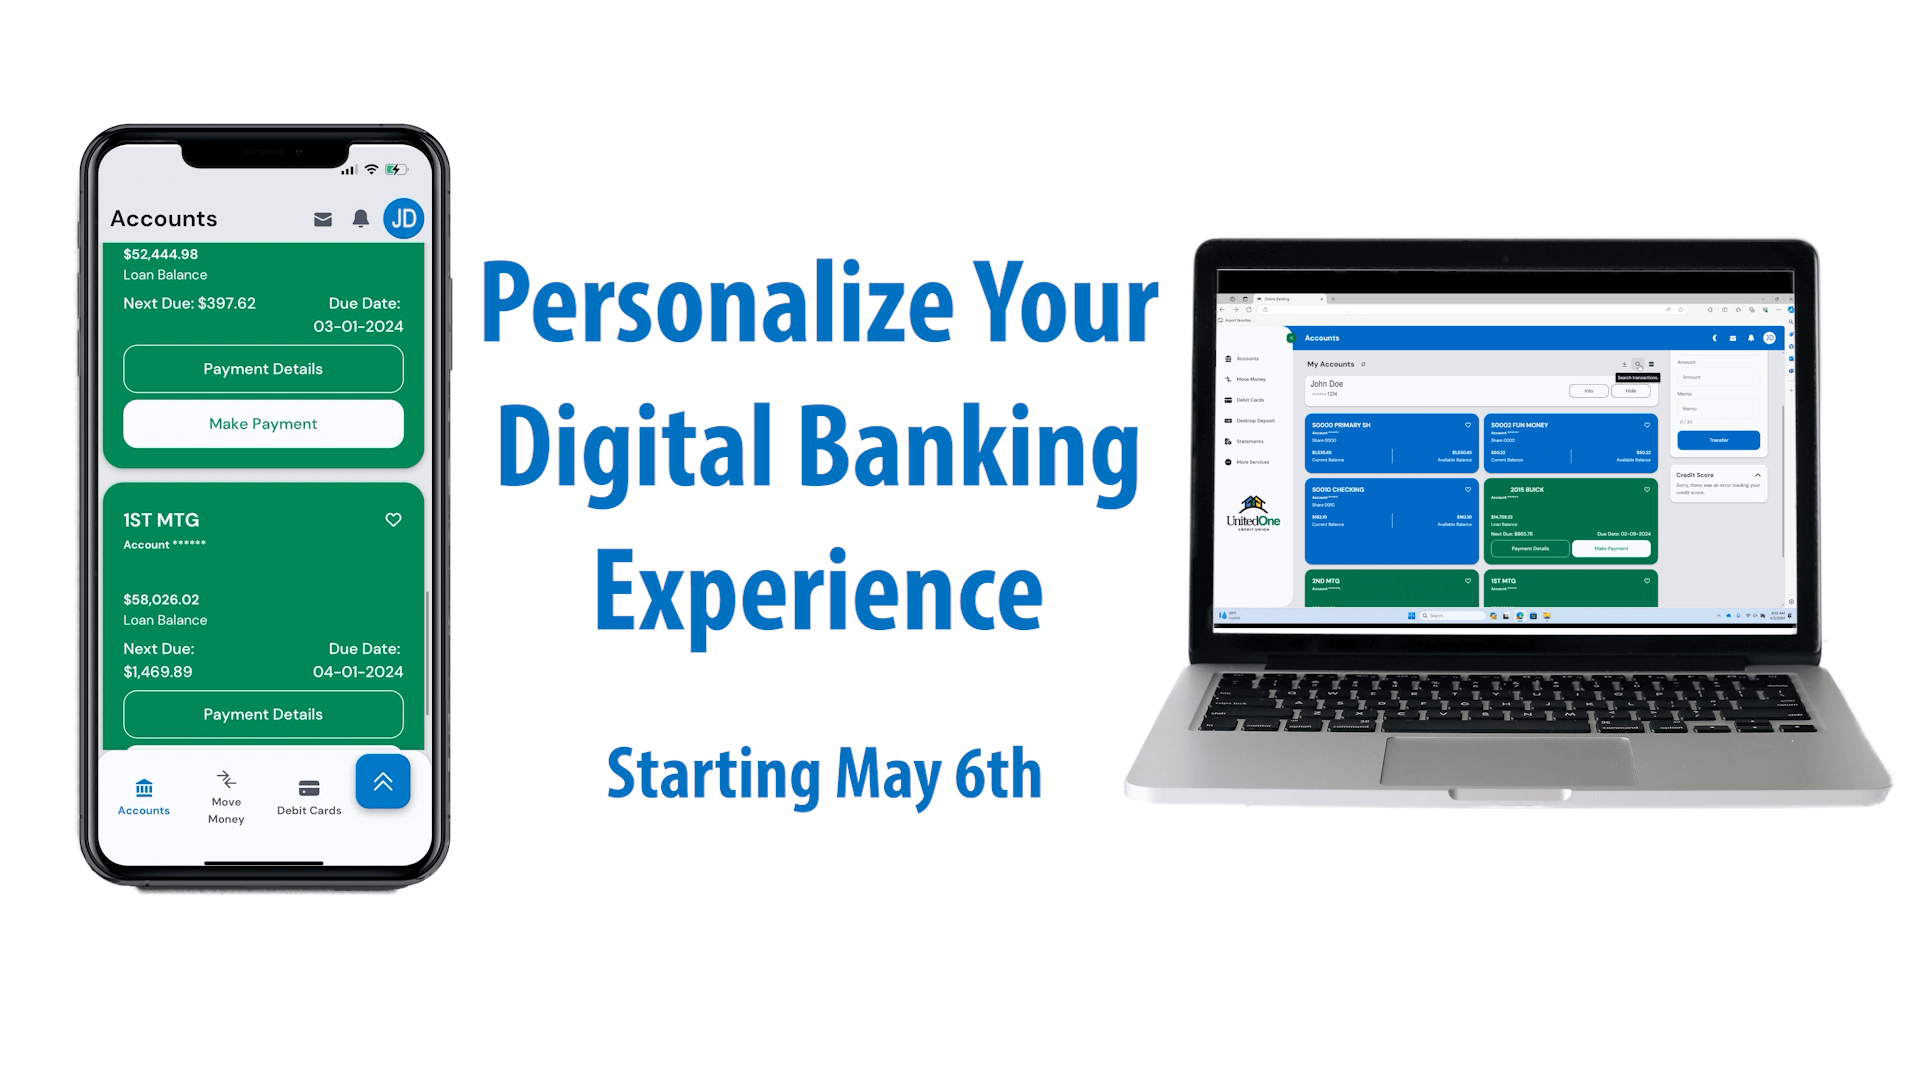 Digital Banking update starting on May 6th